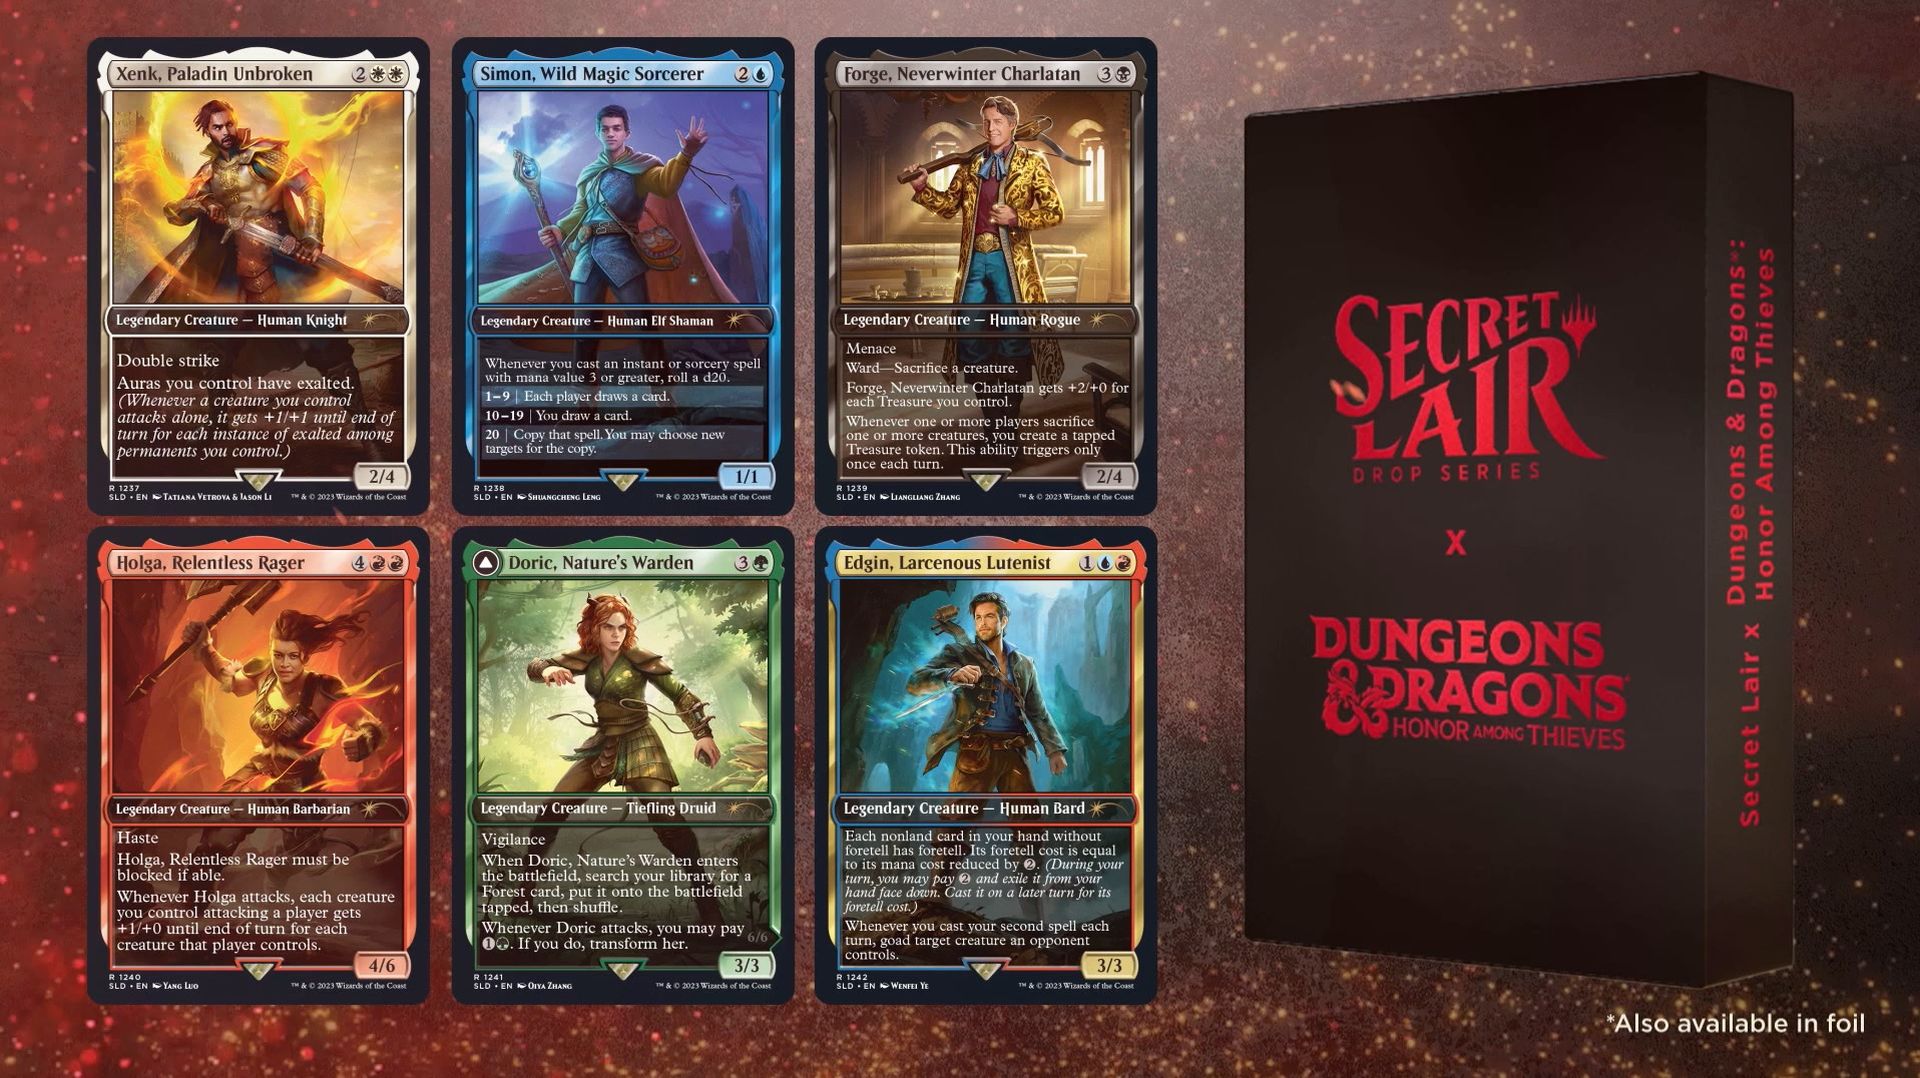 All of the Honor Among Thieves D&D MTG cards released in the Secret Lair Drop